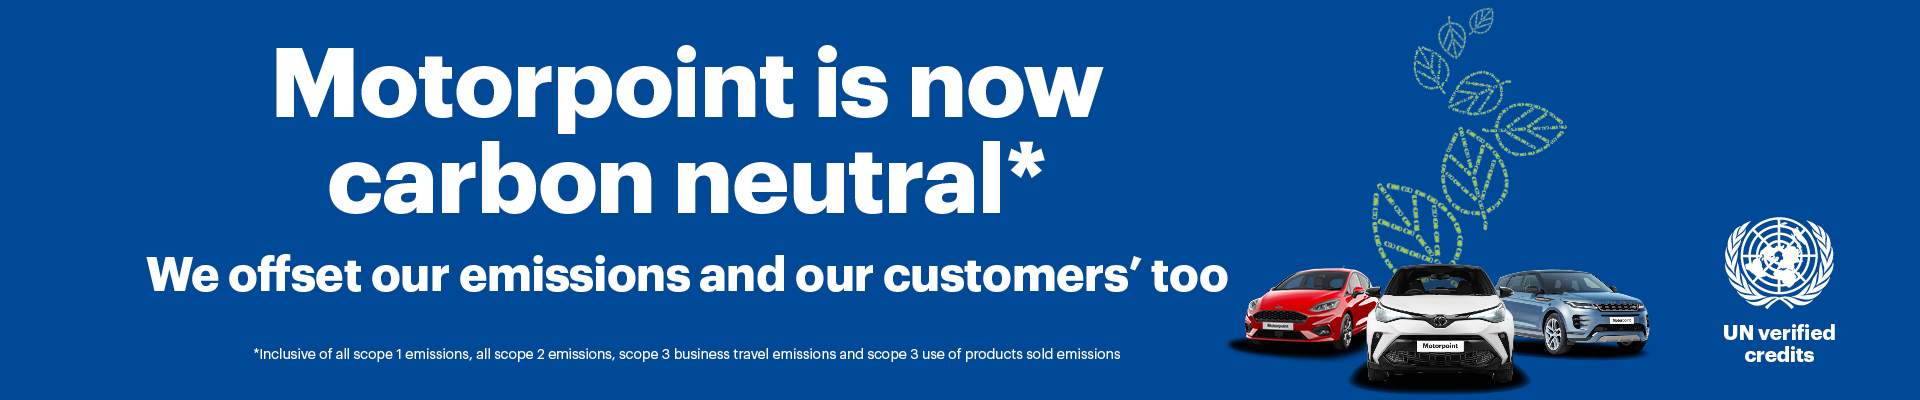 Motorpoint is now carbon neutral